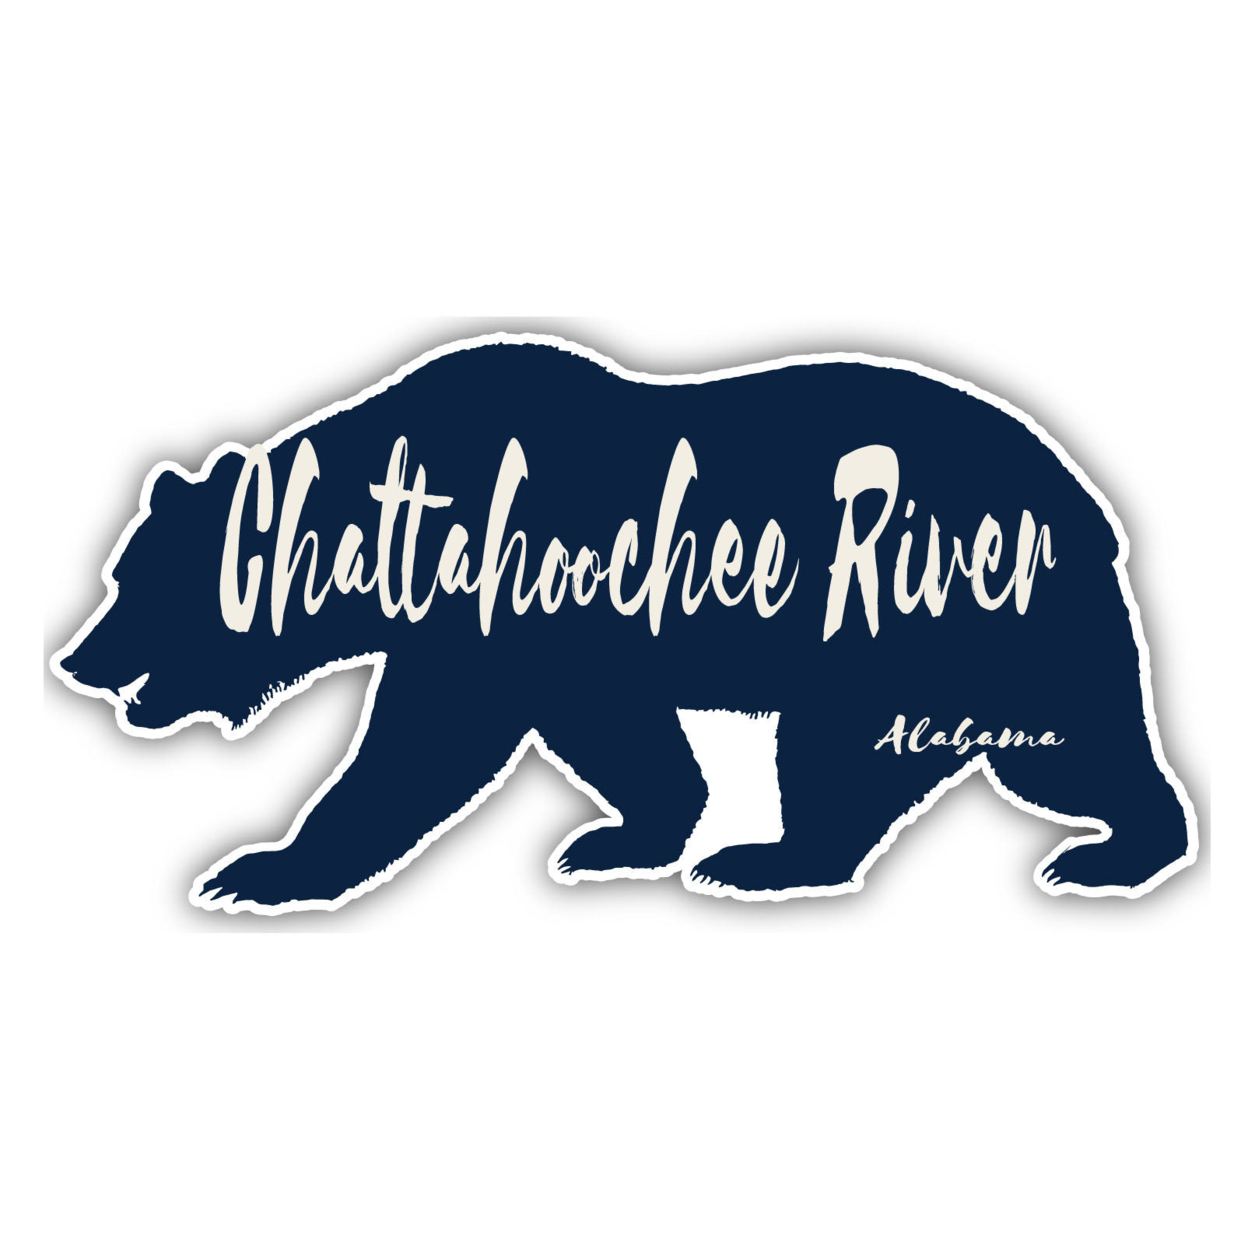 Chattahoochee River Alabama Souvenir Decorative Stickers (Choose Theme And Size) - 4-Pack, 8-Inch, Bear